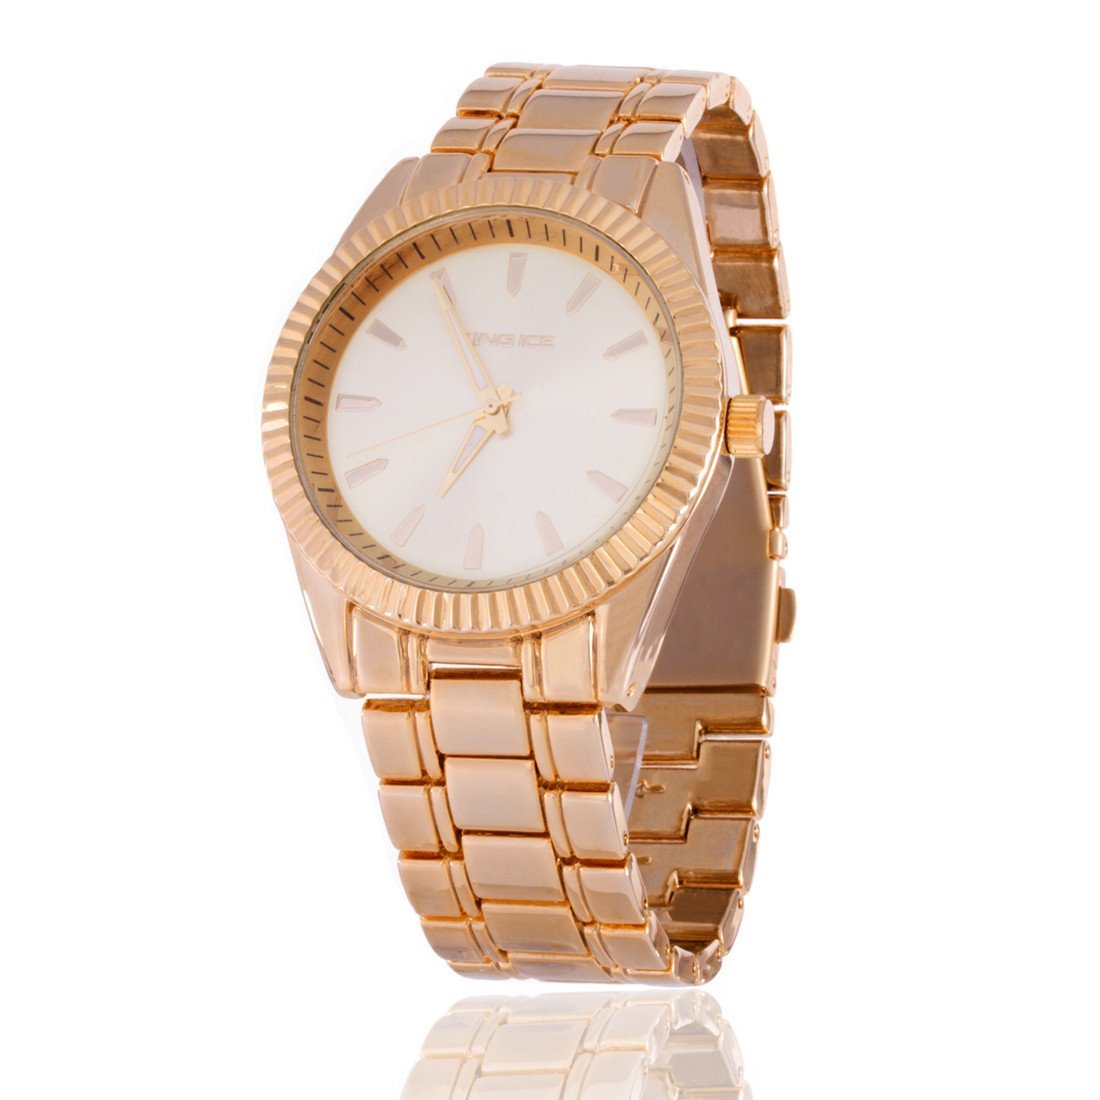 The 14K Gold Tradition Watch by King Ice 14K Gold